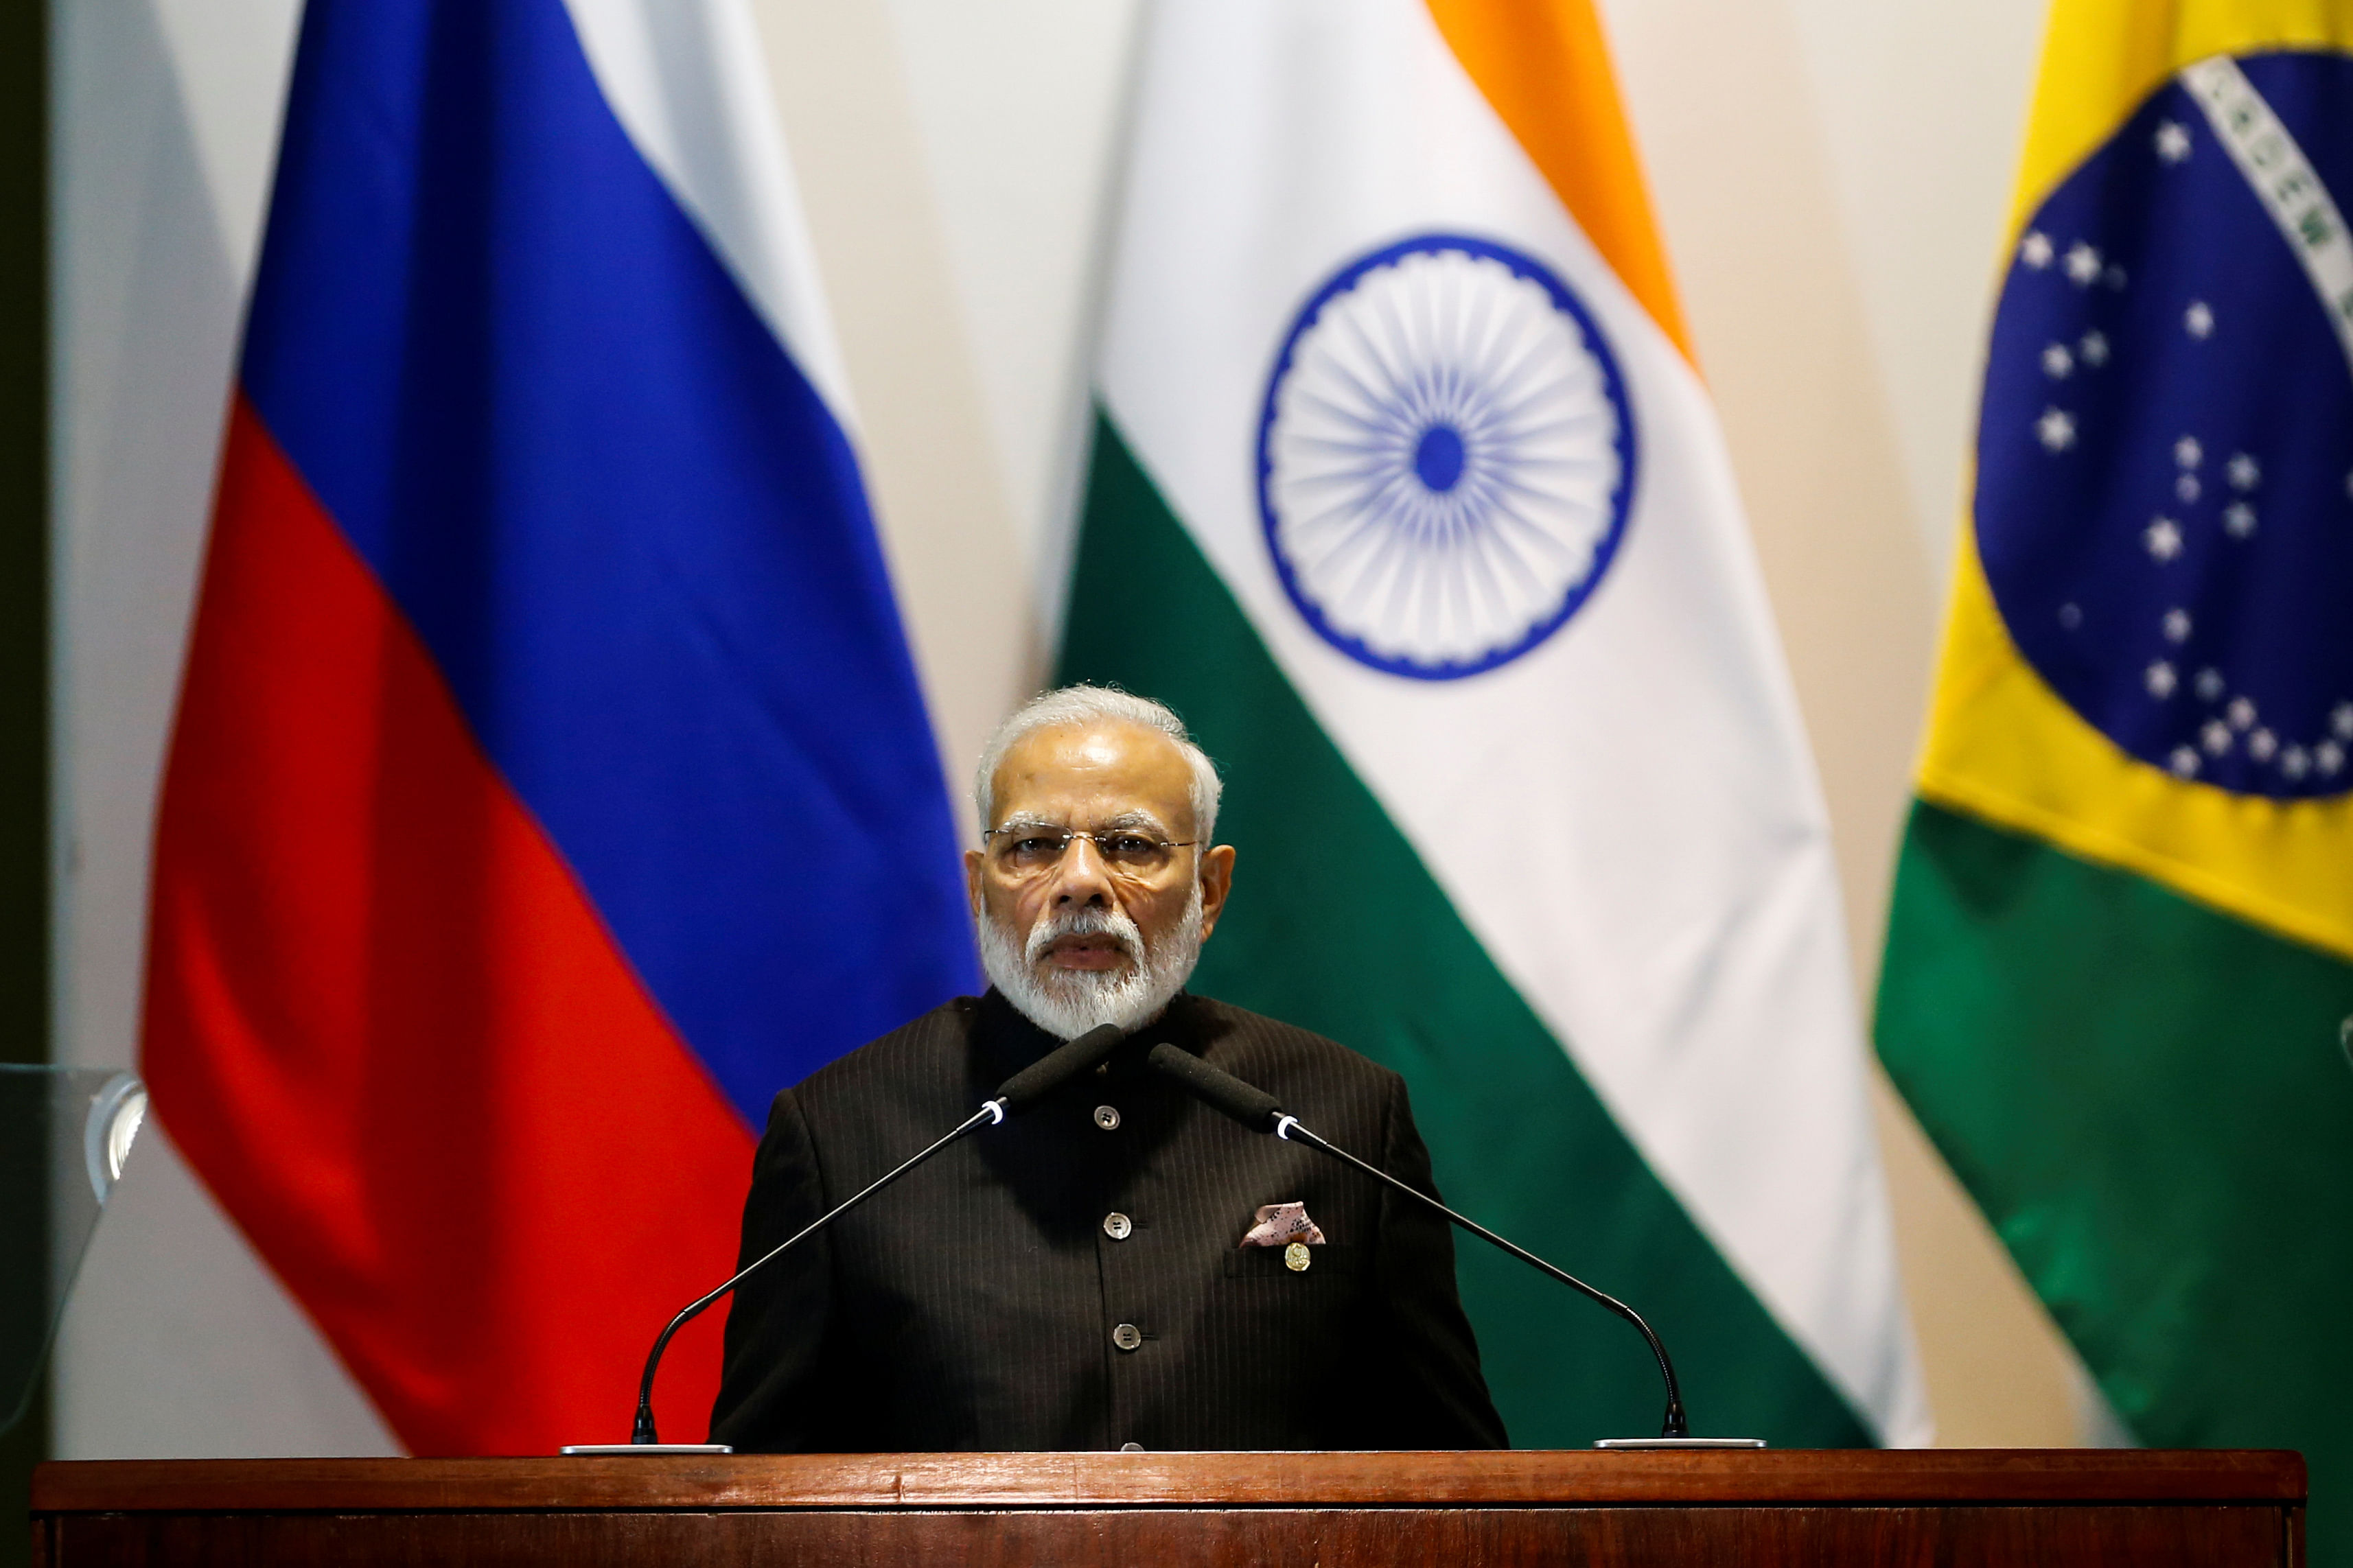 India's Prime Minister Narendra Modi speaks during the Dialogue with BRICS Business Council & New Development Bank during the BRICS summit in Brasilia. (Reuters Photo)